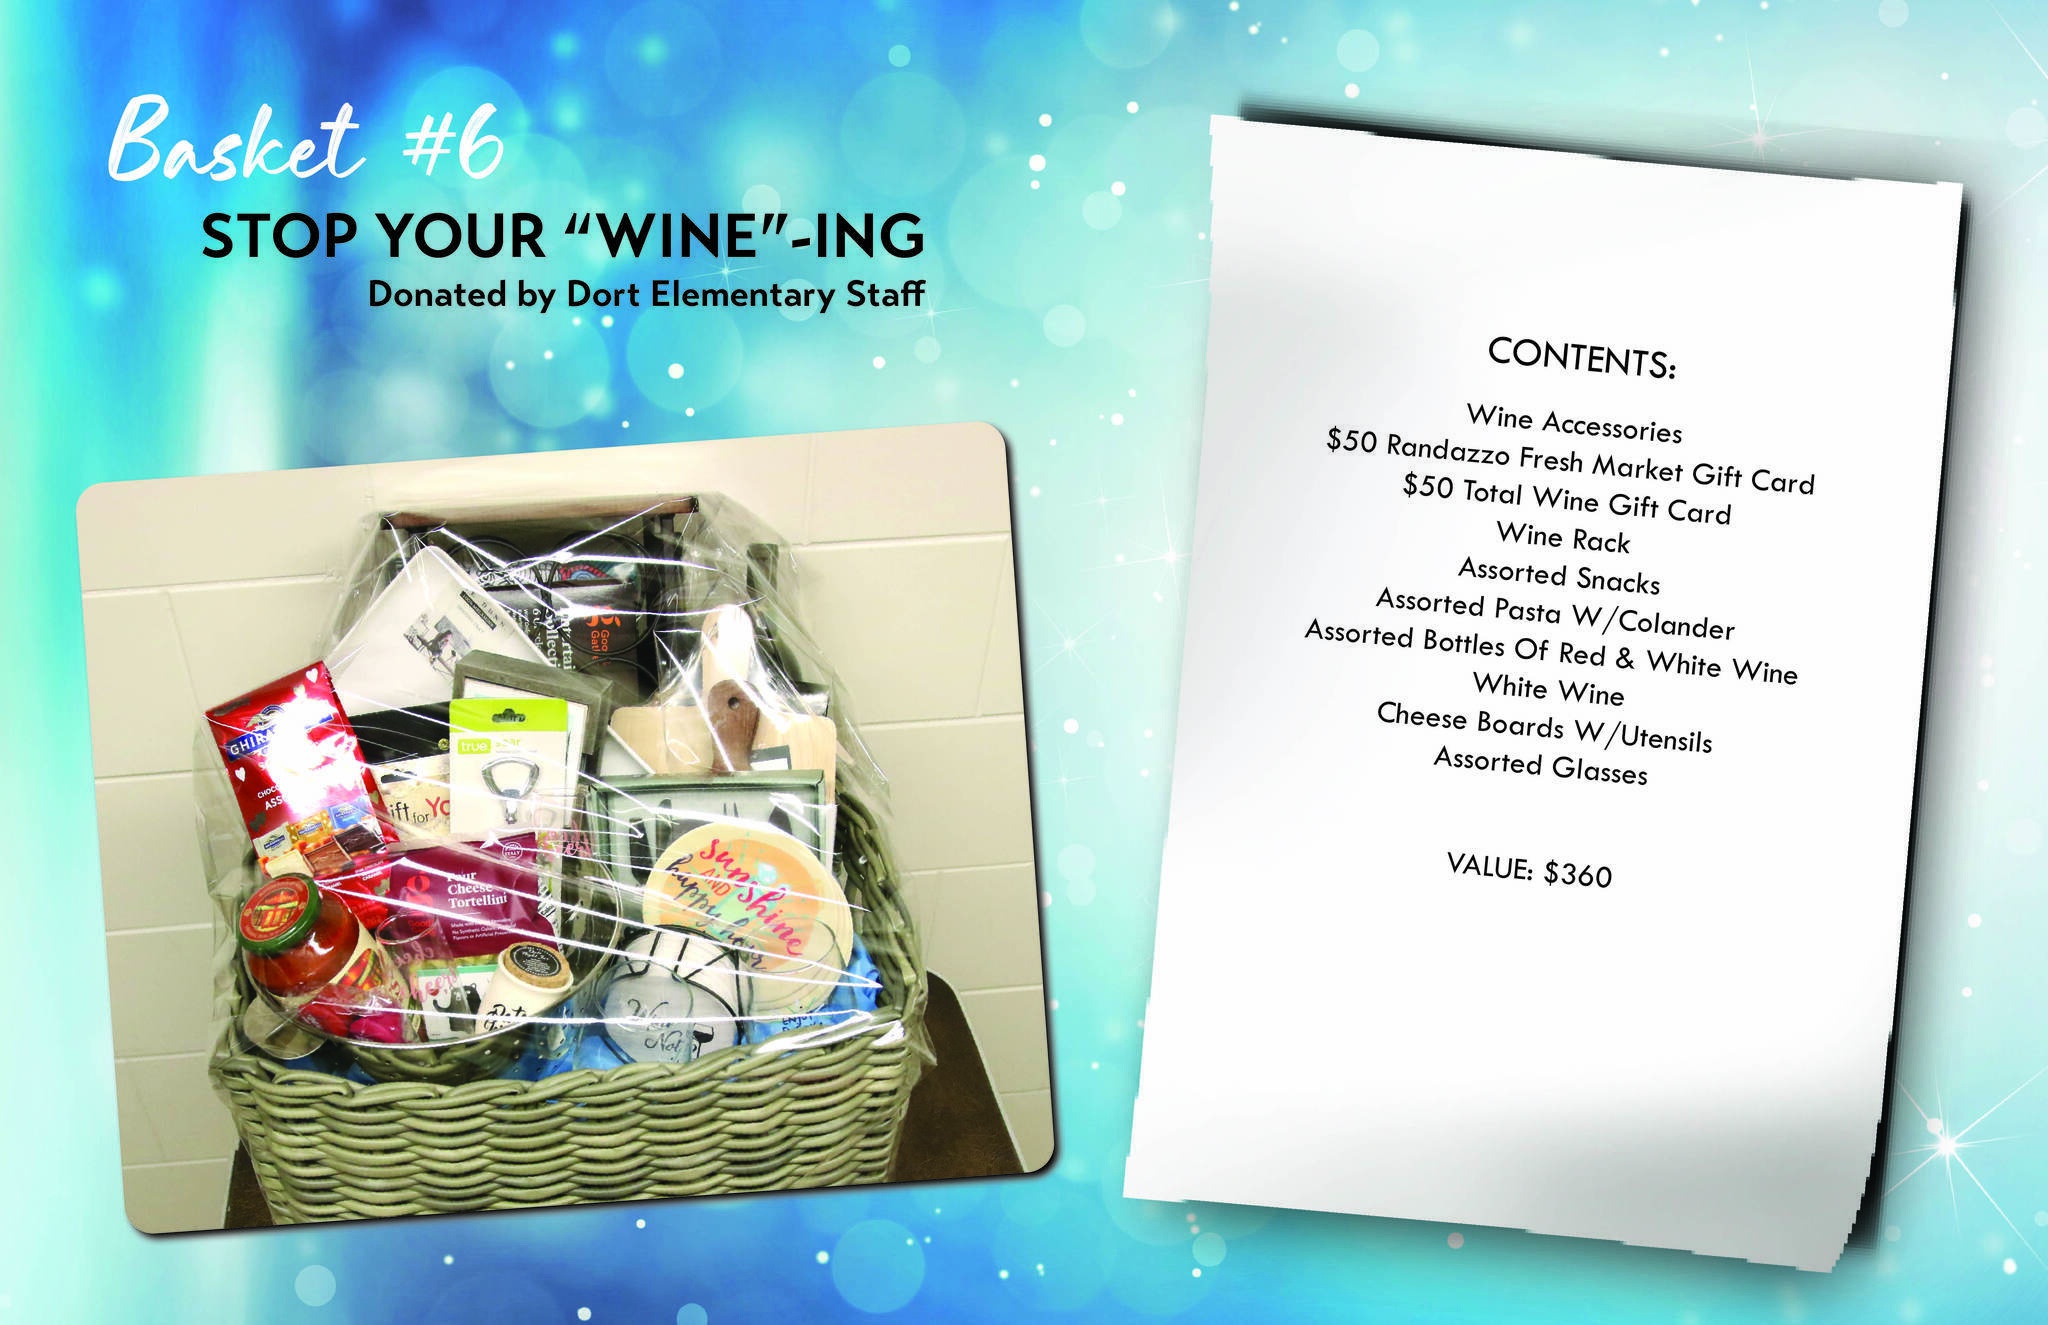 Donated by Dort Elementary Staff: Features two gift cards, wine accessories, pastas, and assorted bottles of wine.